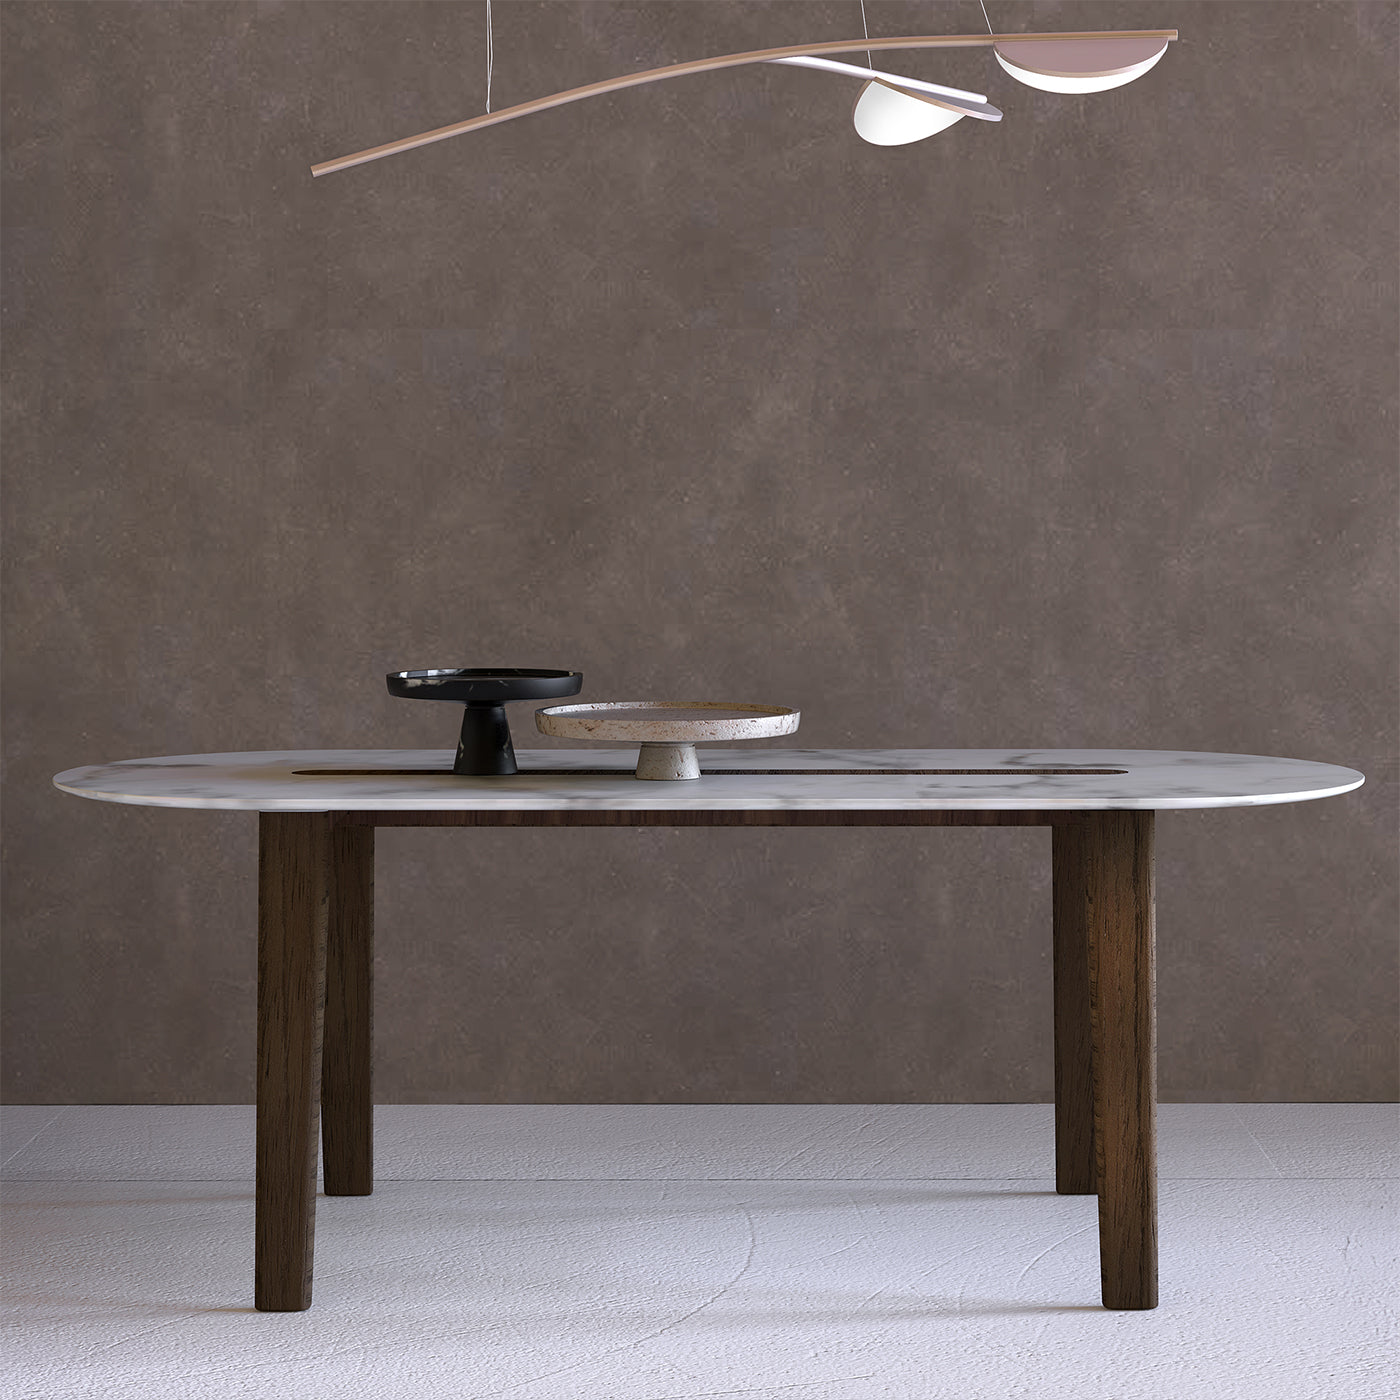 Maximus Dining Table by Emmanuel Gallina - Alternative view 3